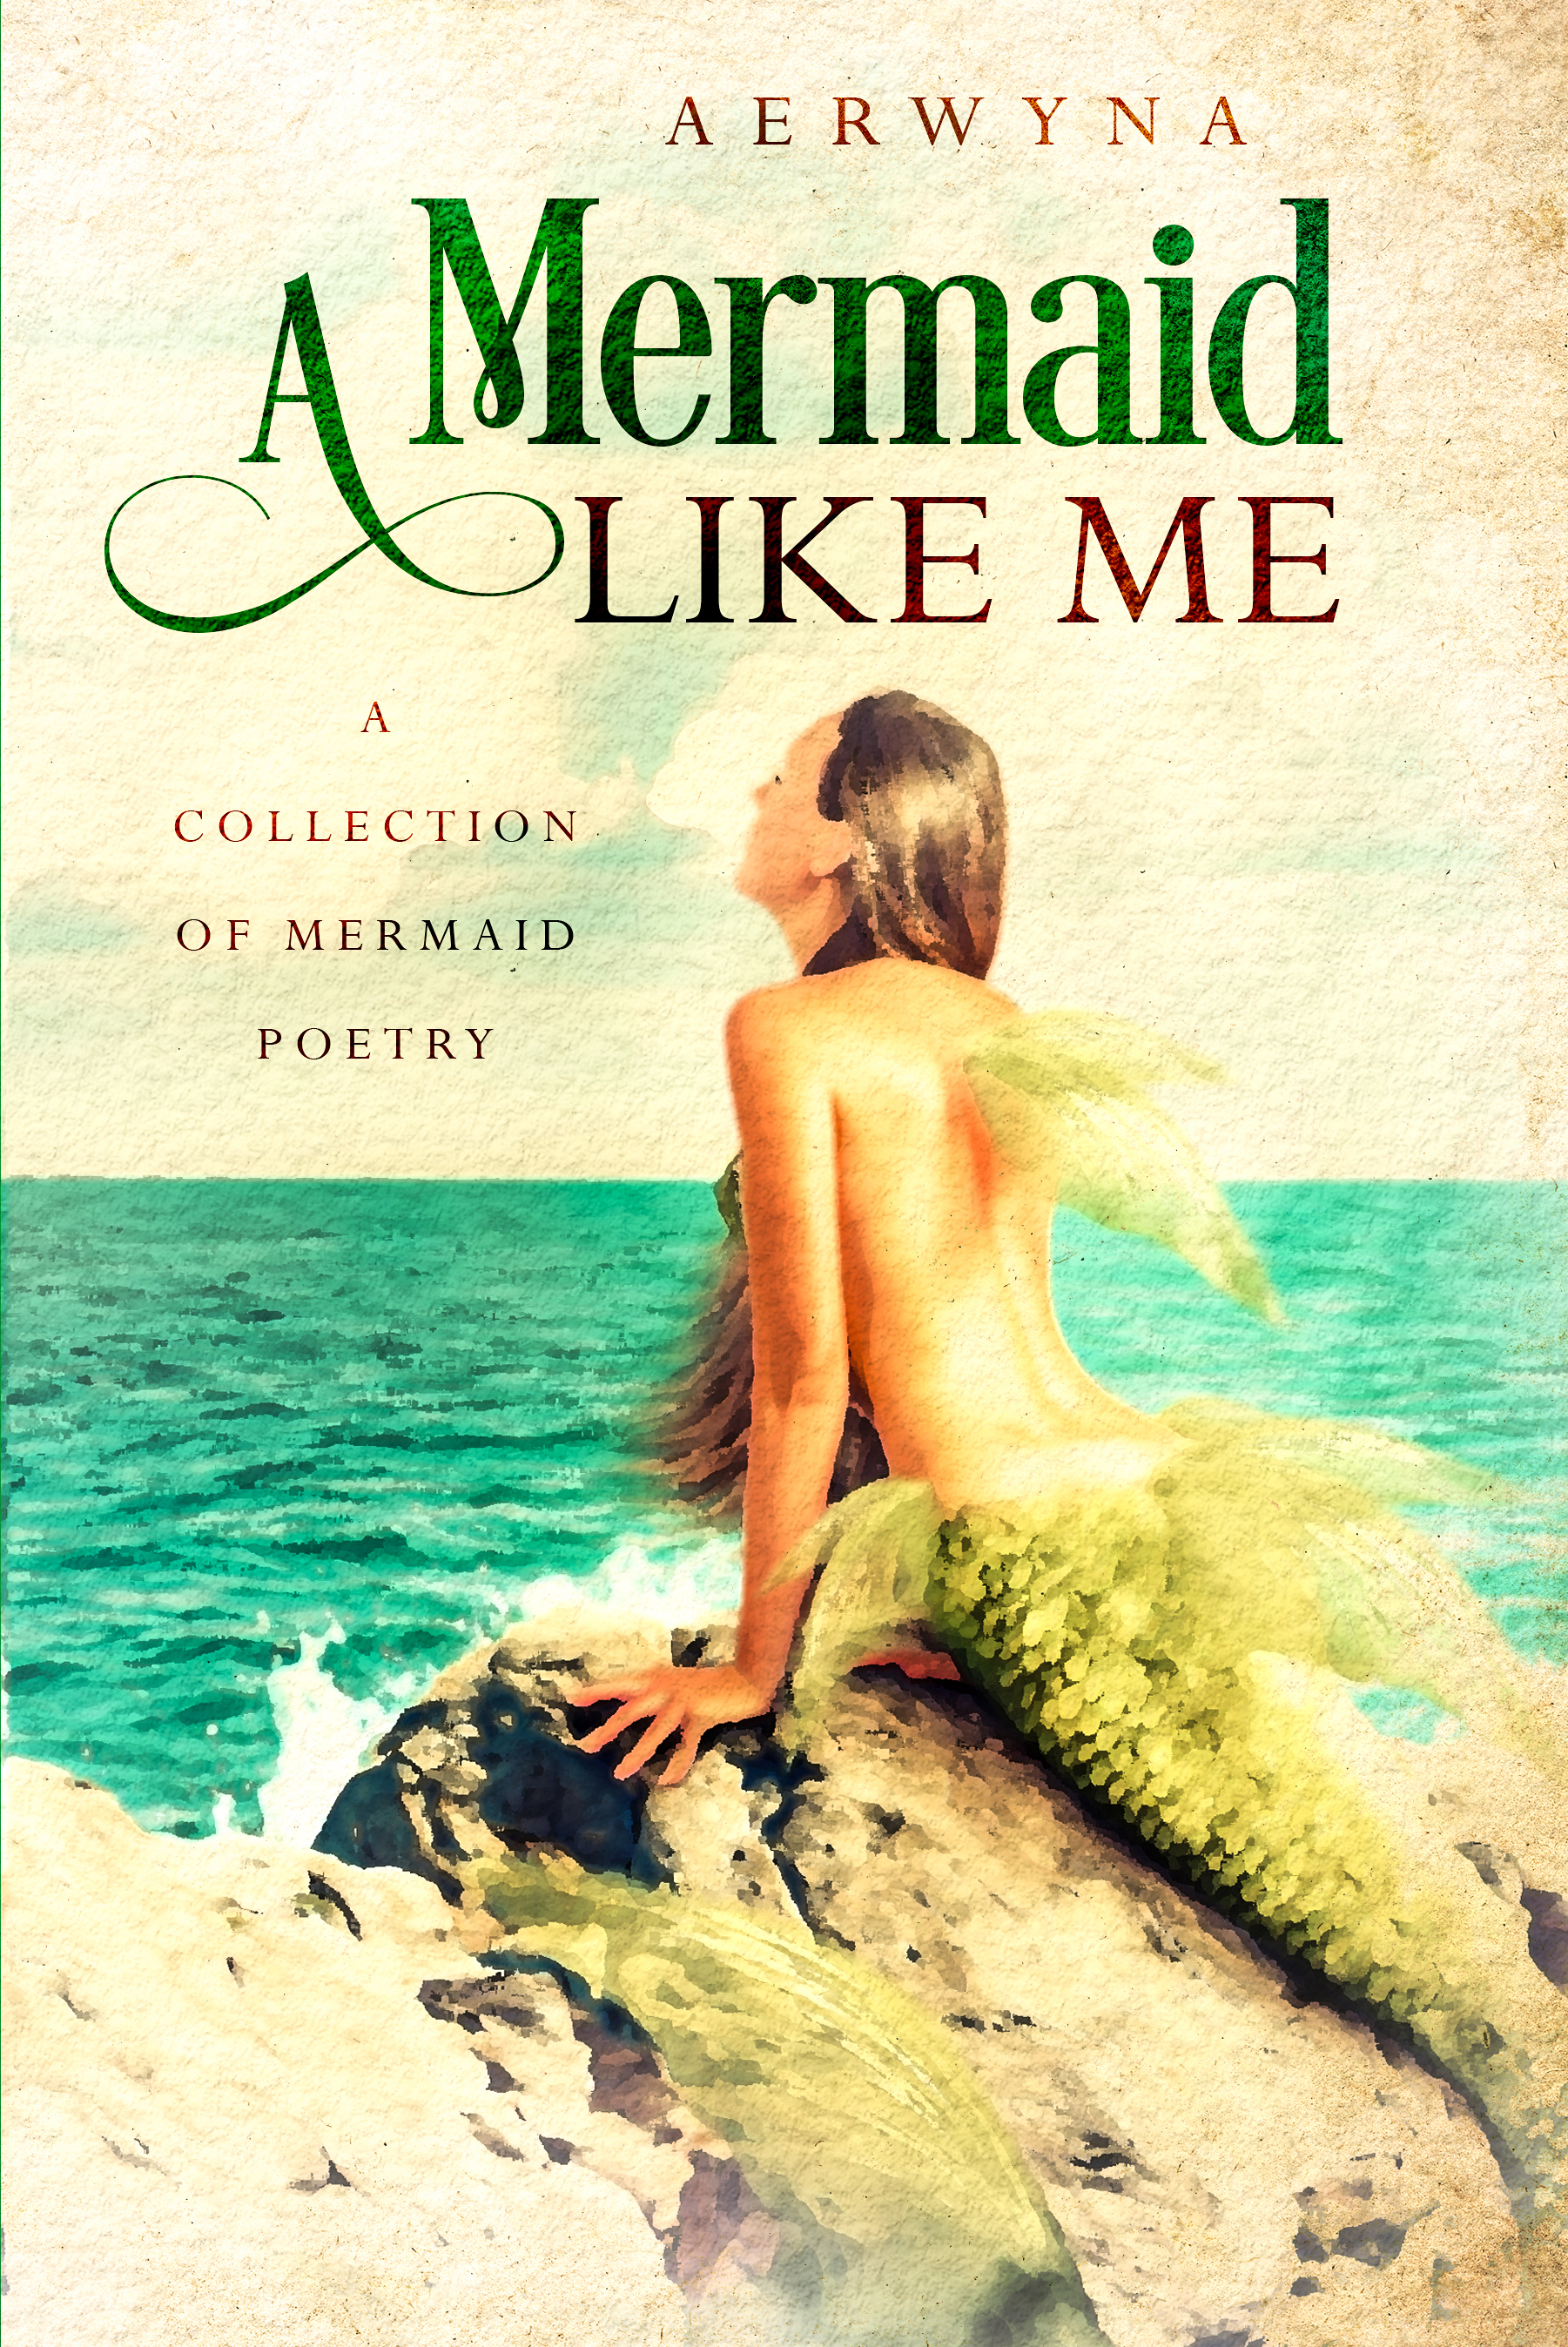 Enjoy these books by Aerwyna, author and webmaster of UniquelyMermaid.com.